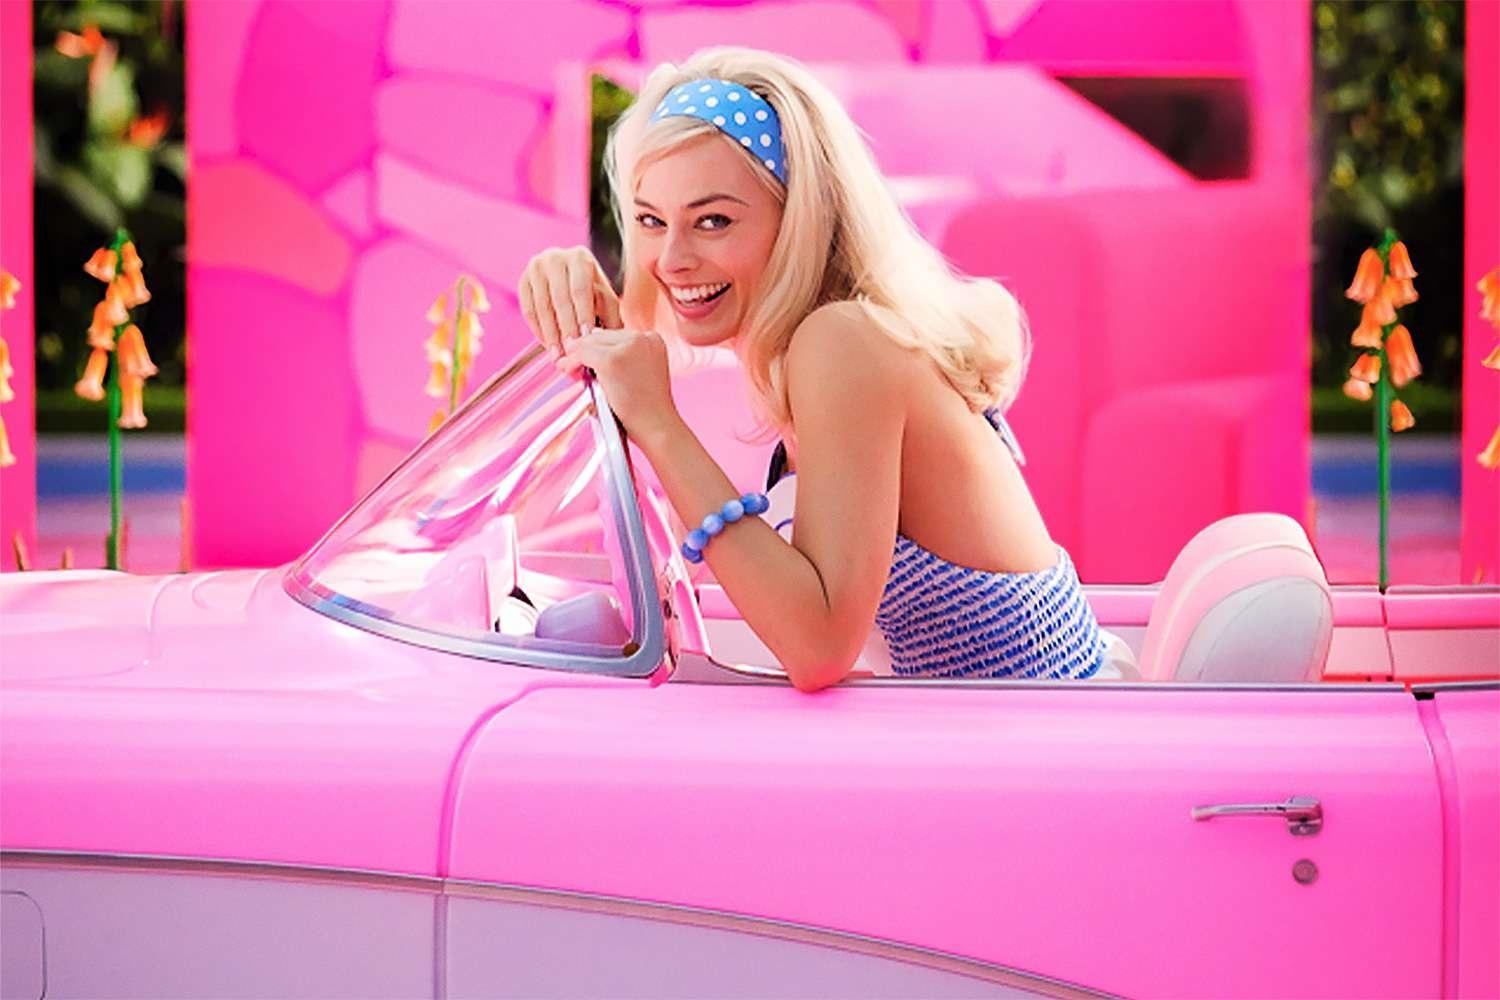 The Barbie Movie: A Fun, Heartwarming, and Subversive Take on the Iconic Doll